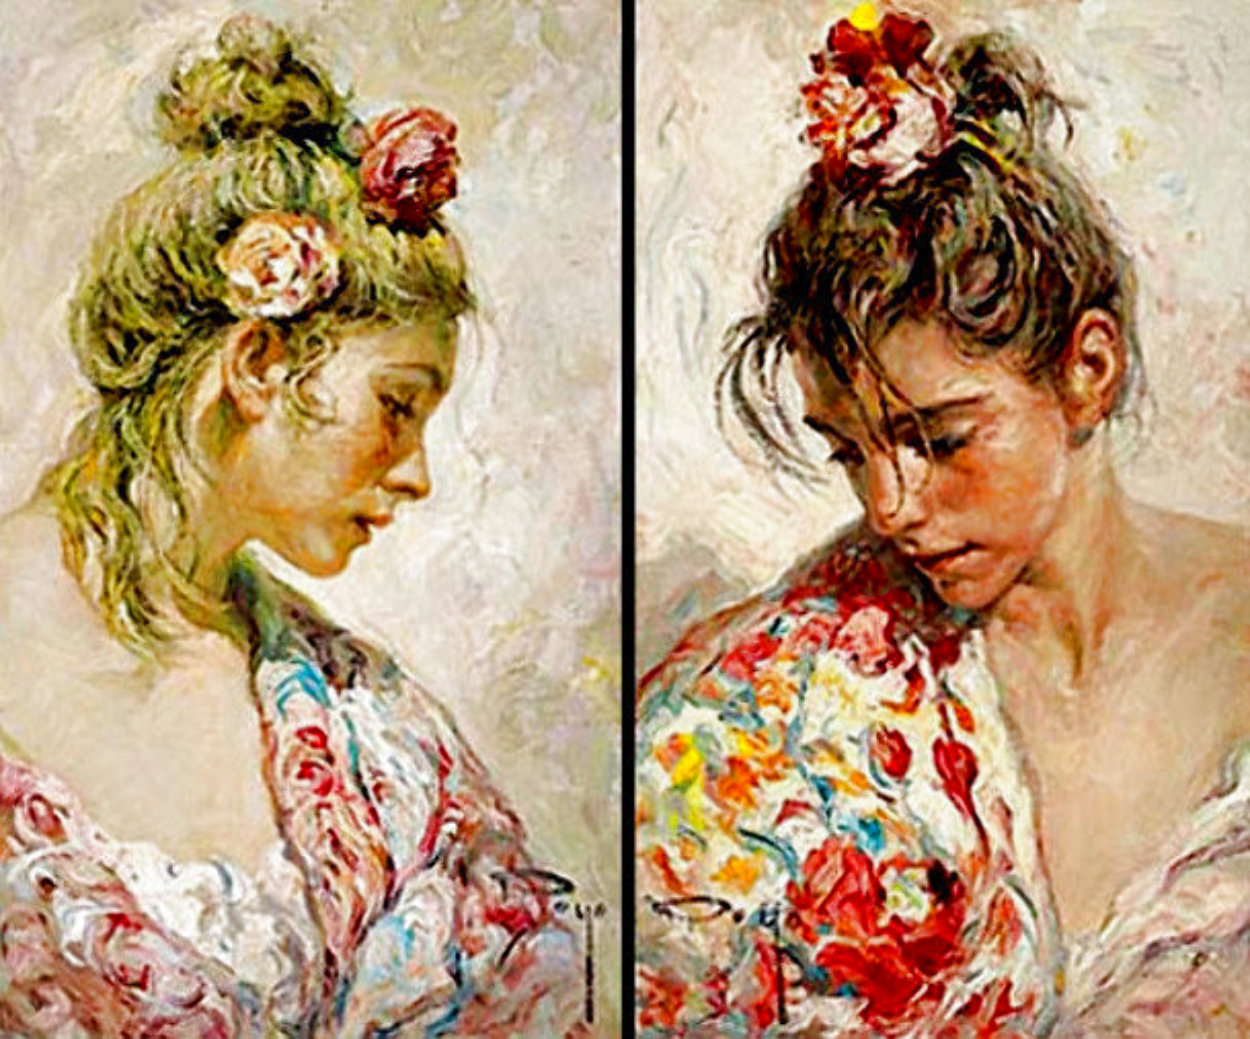 Shawl Suite of 2 Paintings: Claveles -  And El Manton 1990 28x22  Original Painting by  Royo